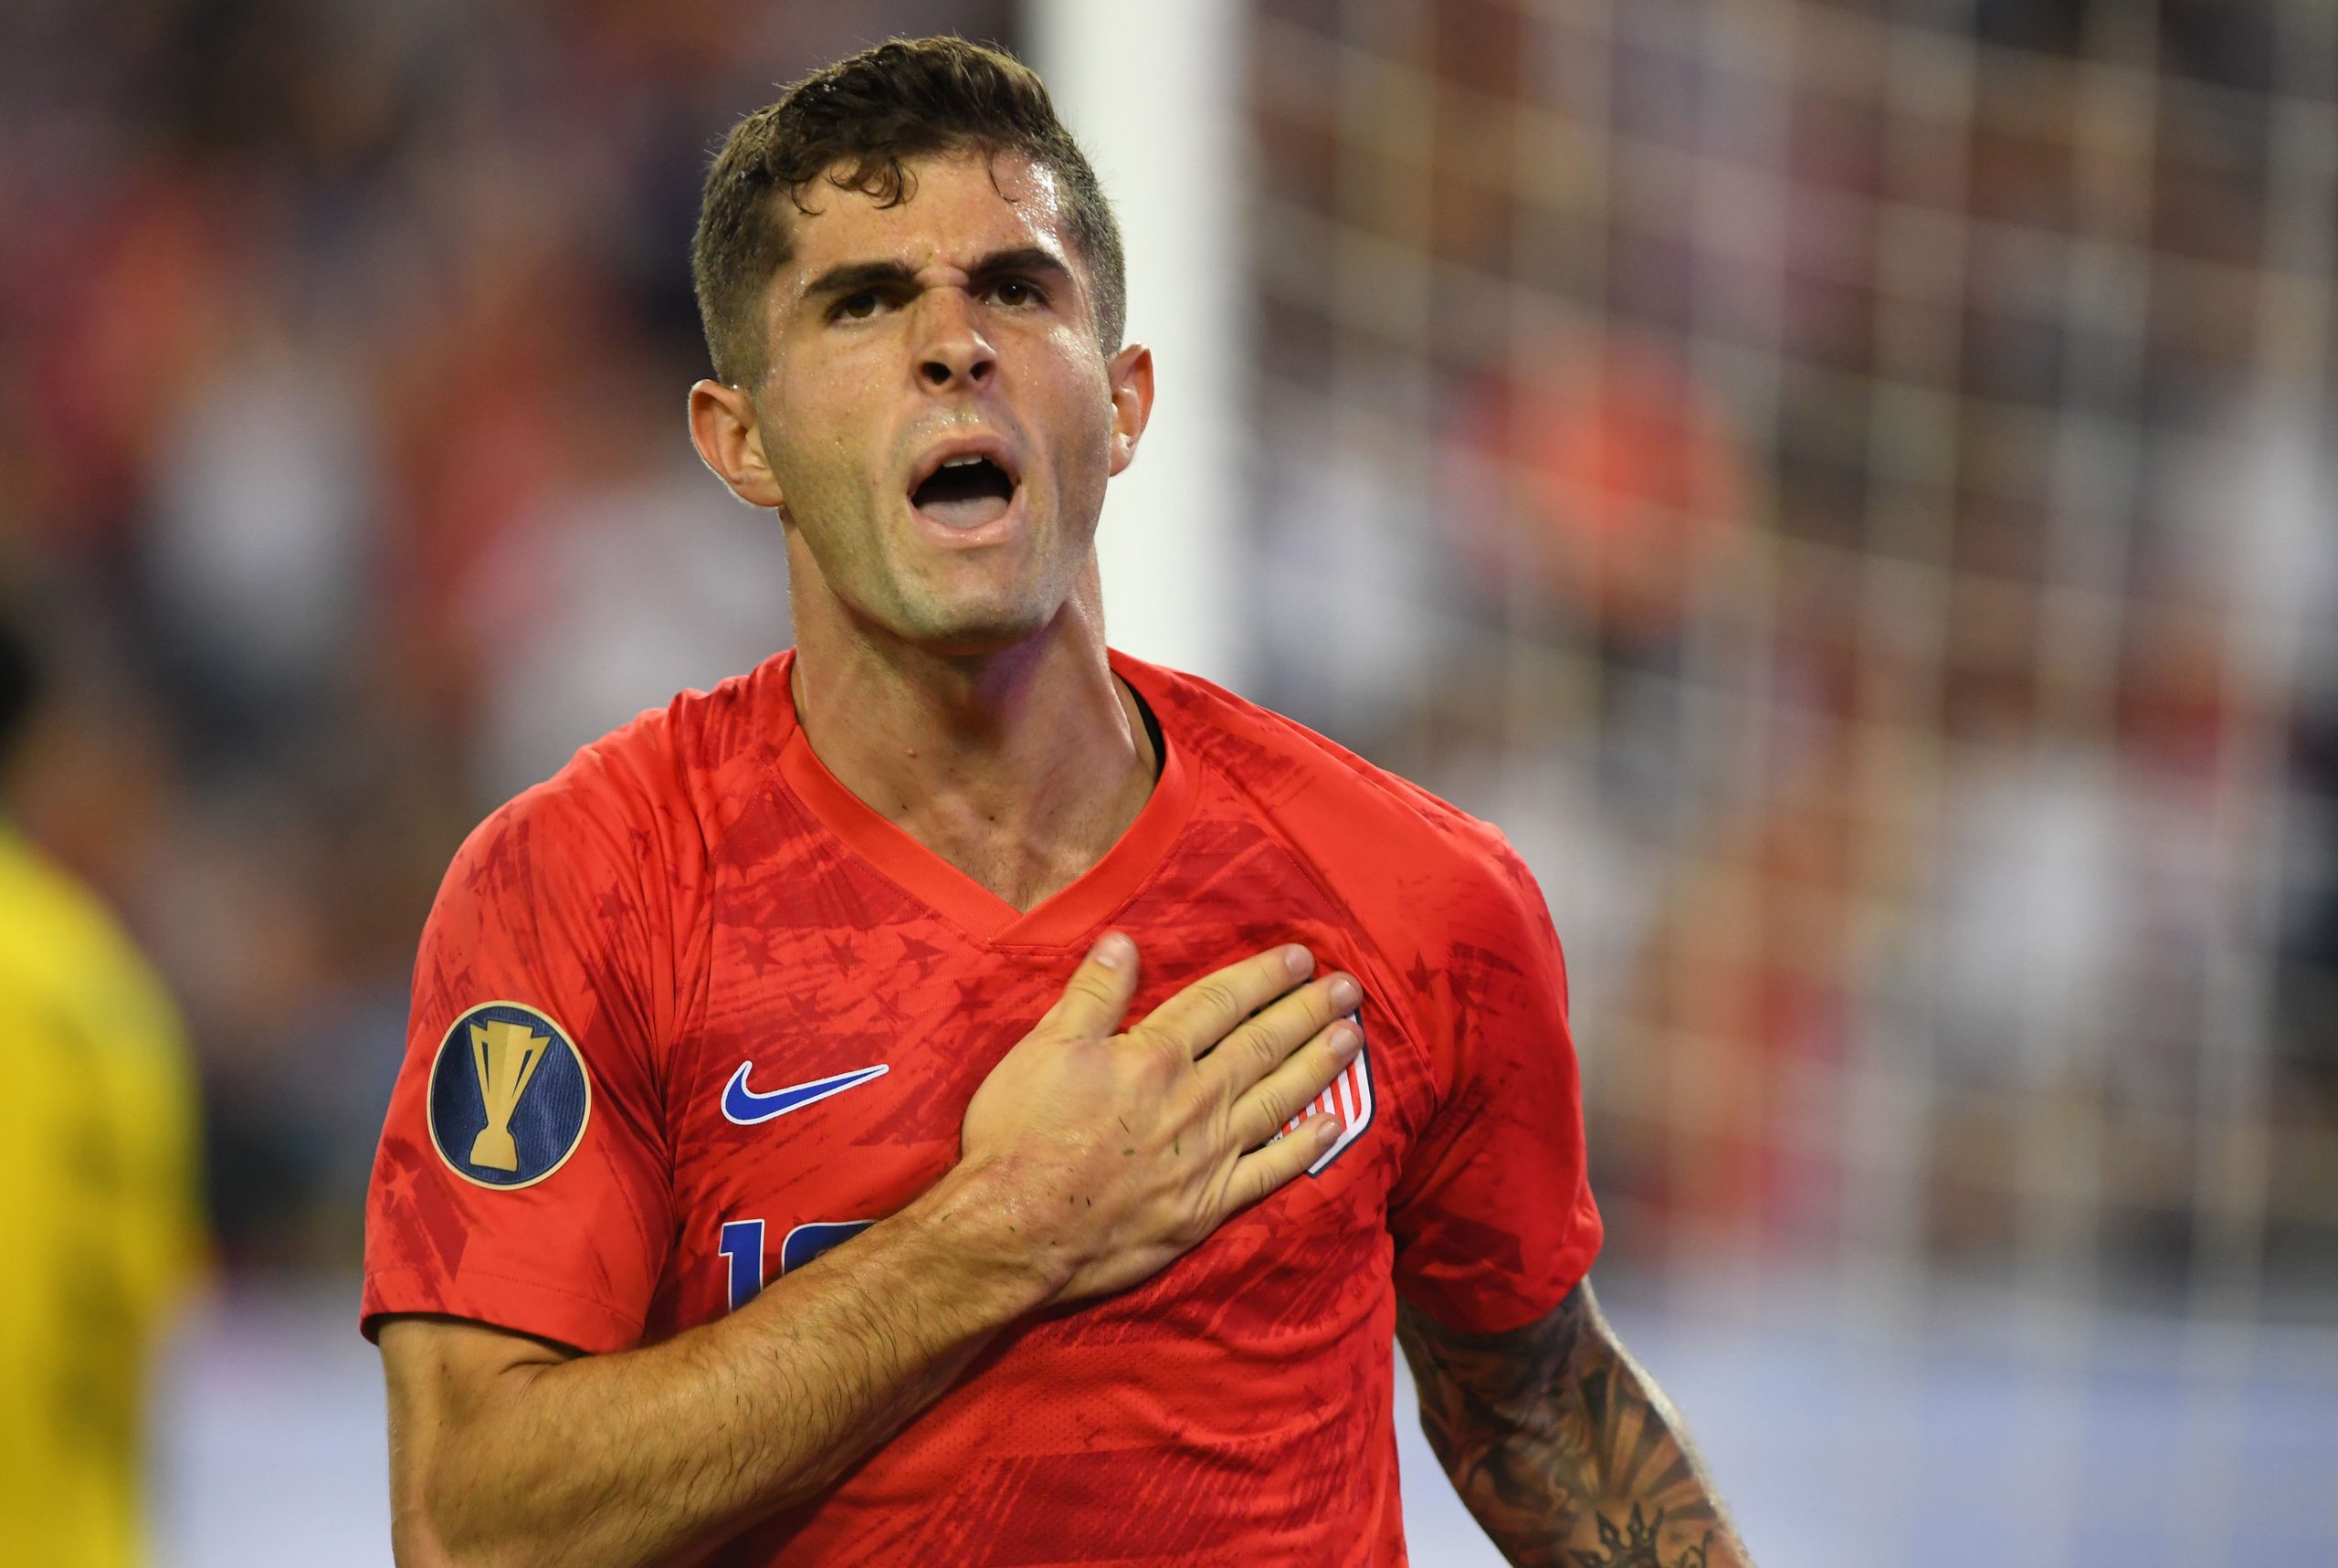 Christian Pulisic (10) celebrates after a goal against Jamaica